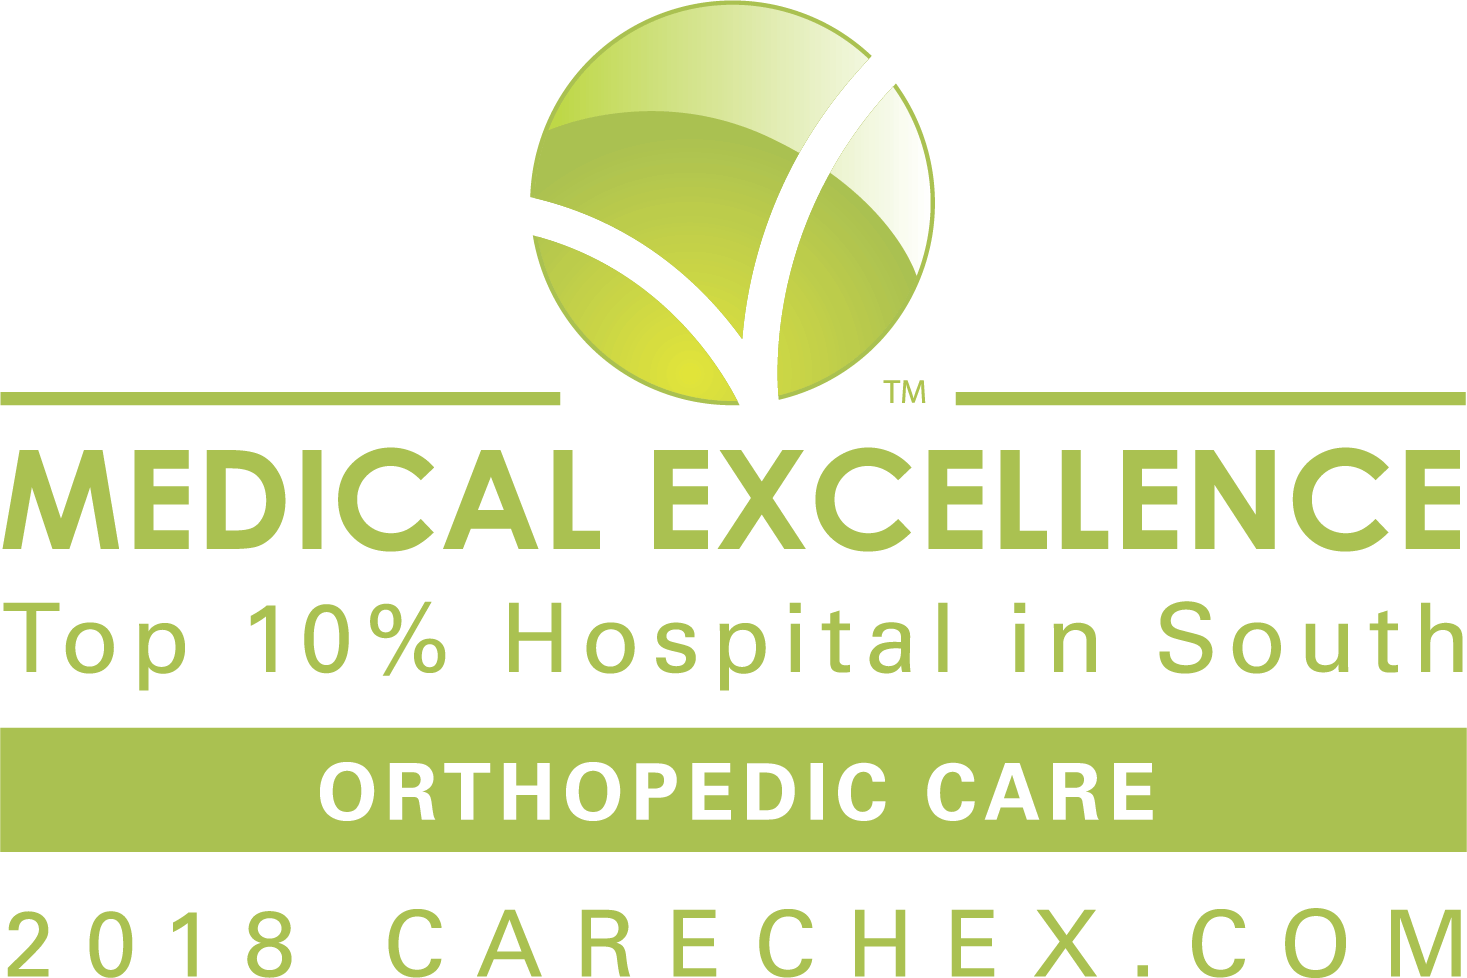 Williamson Medical Center 2018 CareChex Award - Top 10% of Hospitals in South for Medical Excellence Orthopedic care.